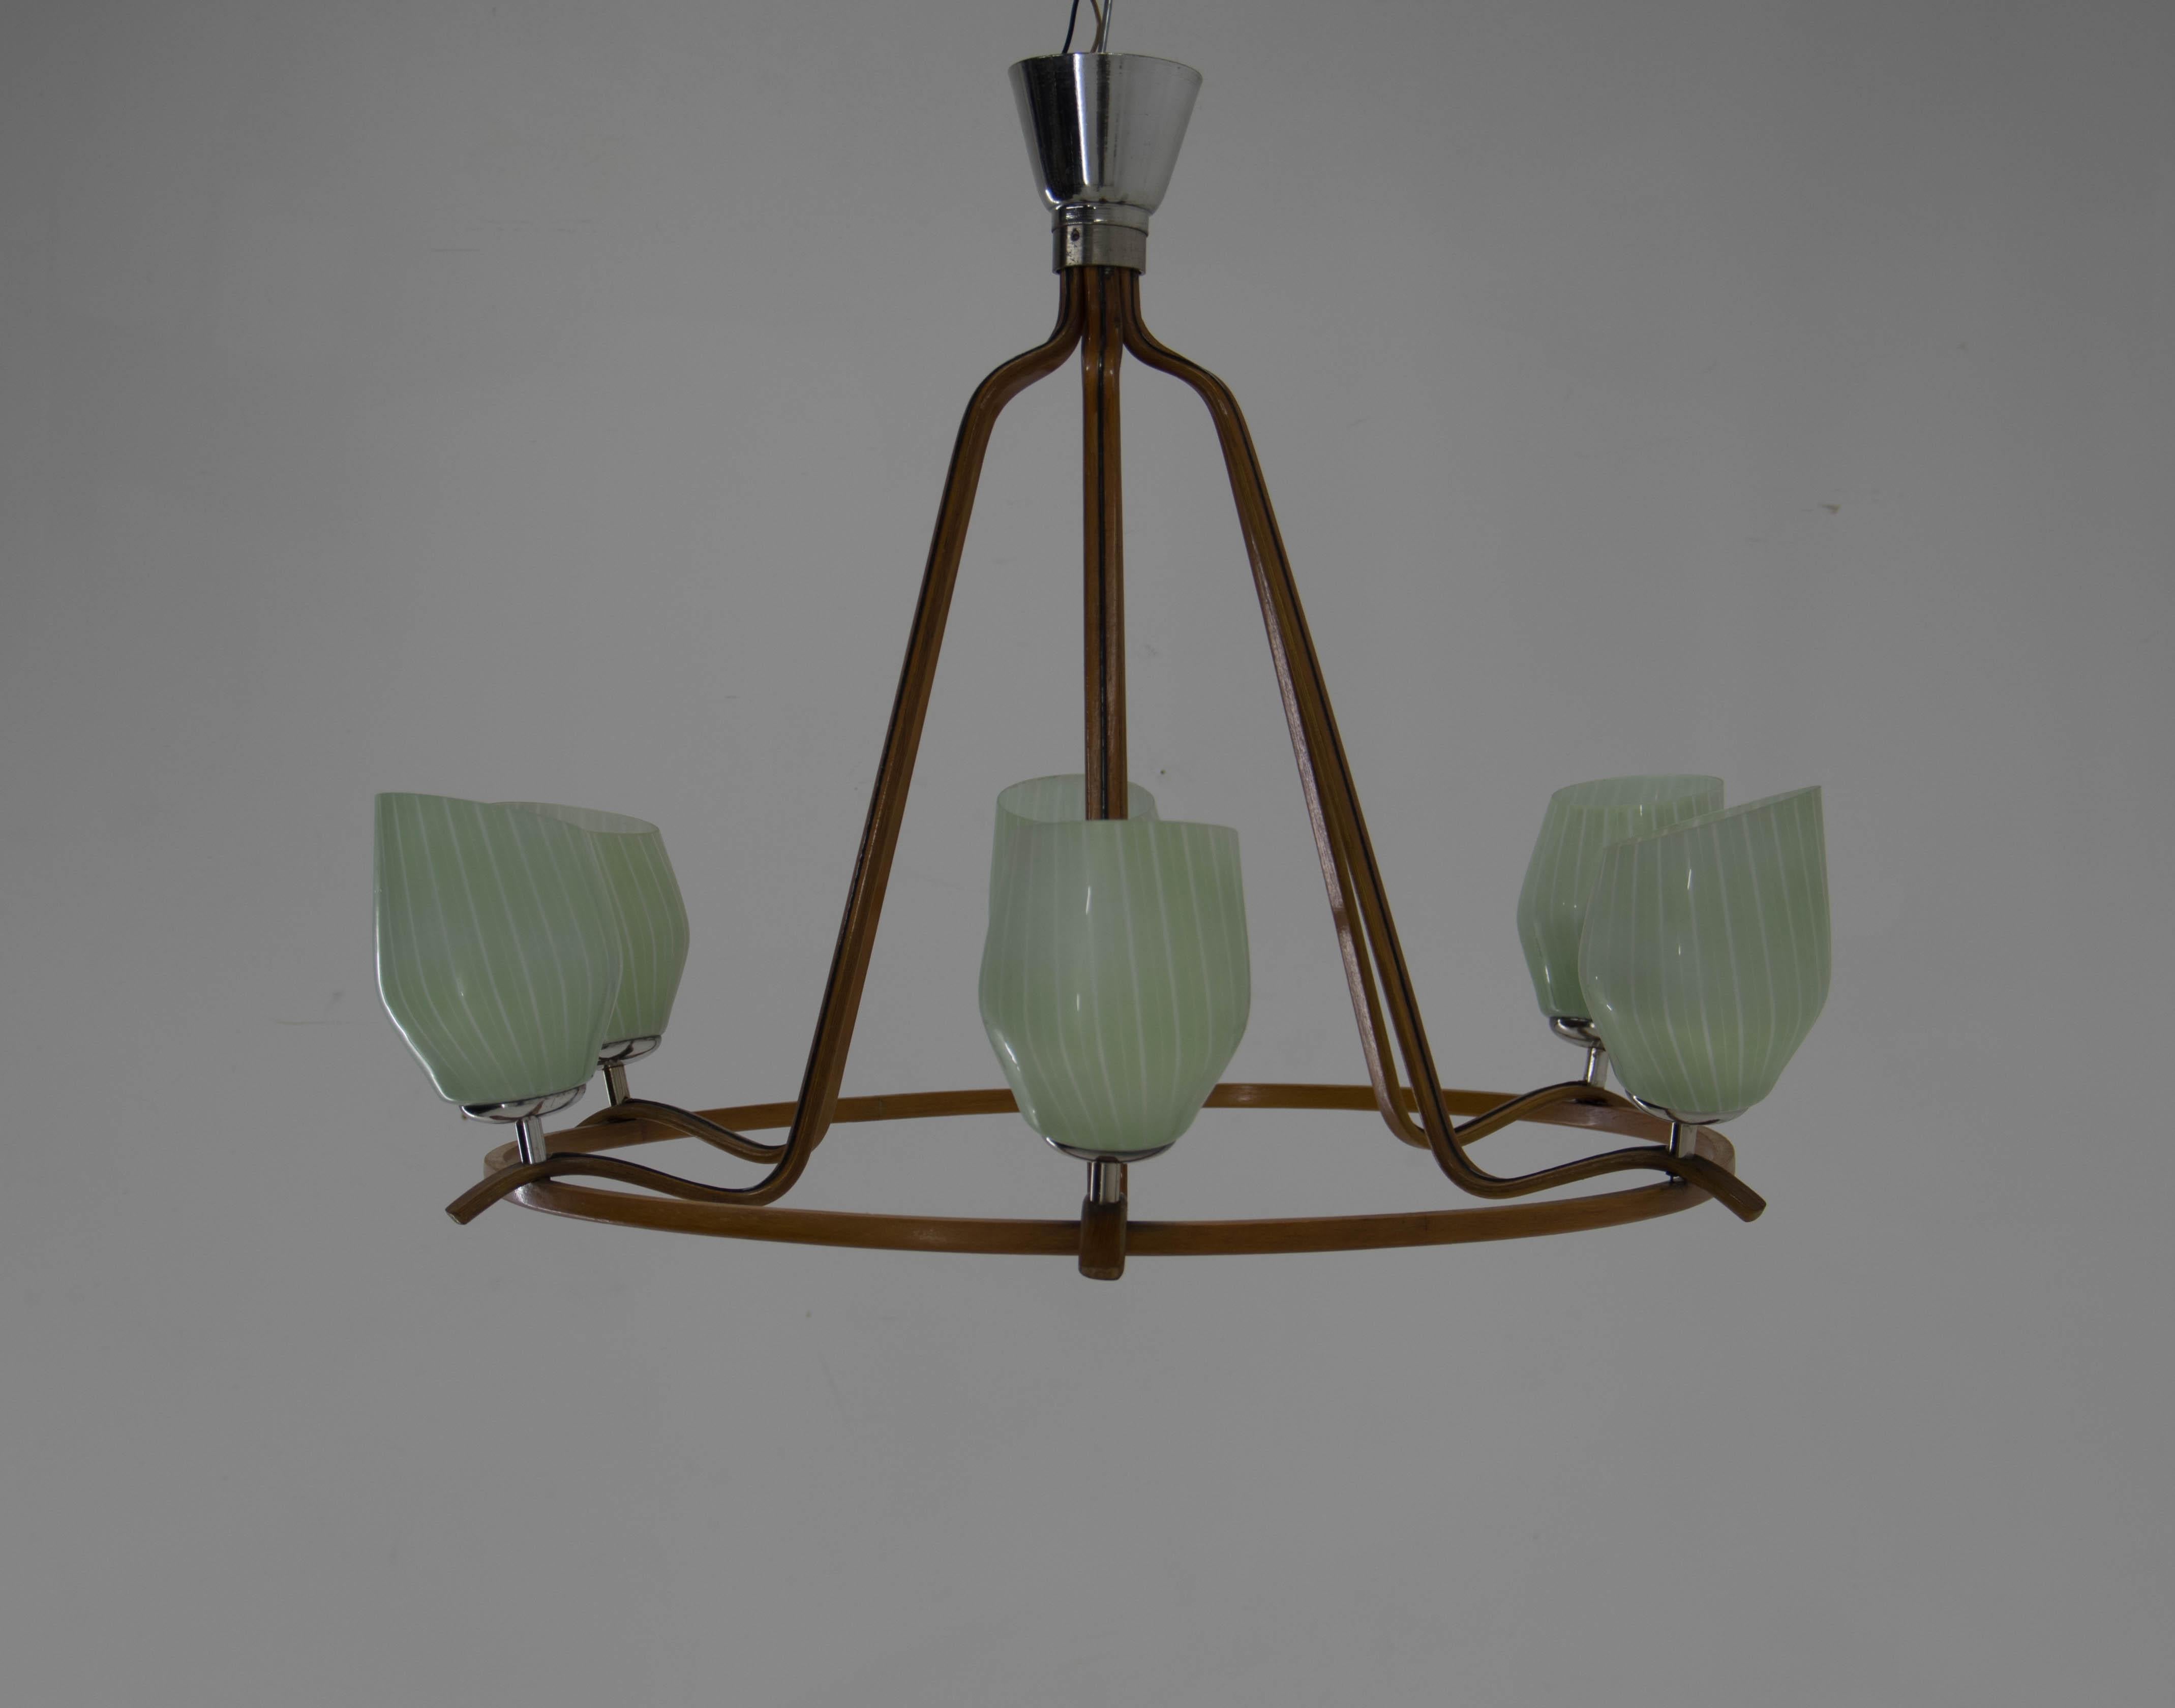 Large chandelier made by Drevo Humpolec in 1960s.
Made of wood and glass.
Very good original condition.
6x40W, E25-E27 bulbs
US wiring compatible